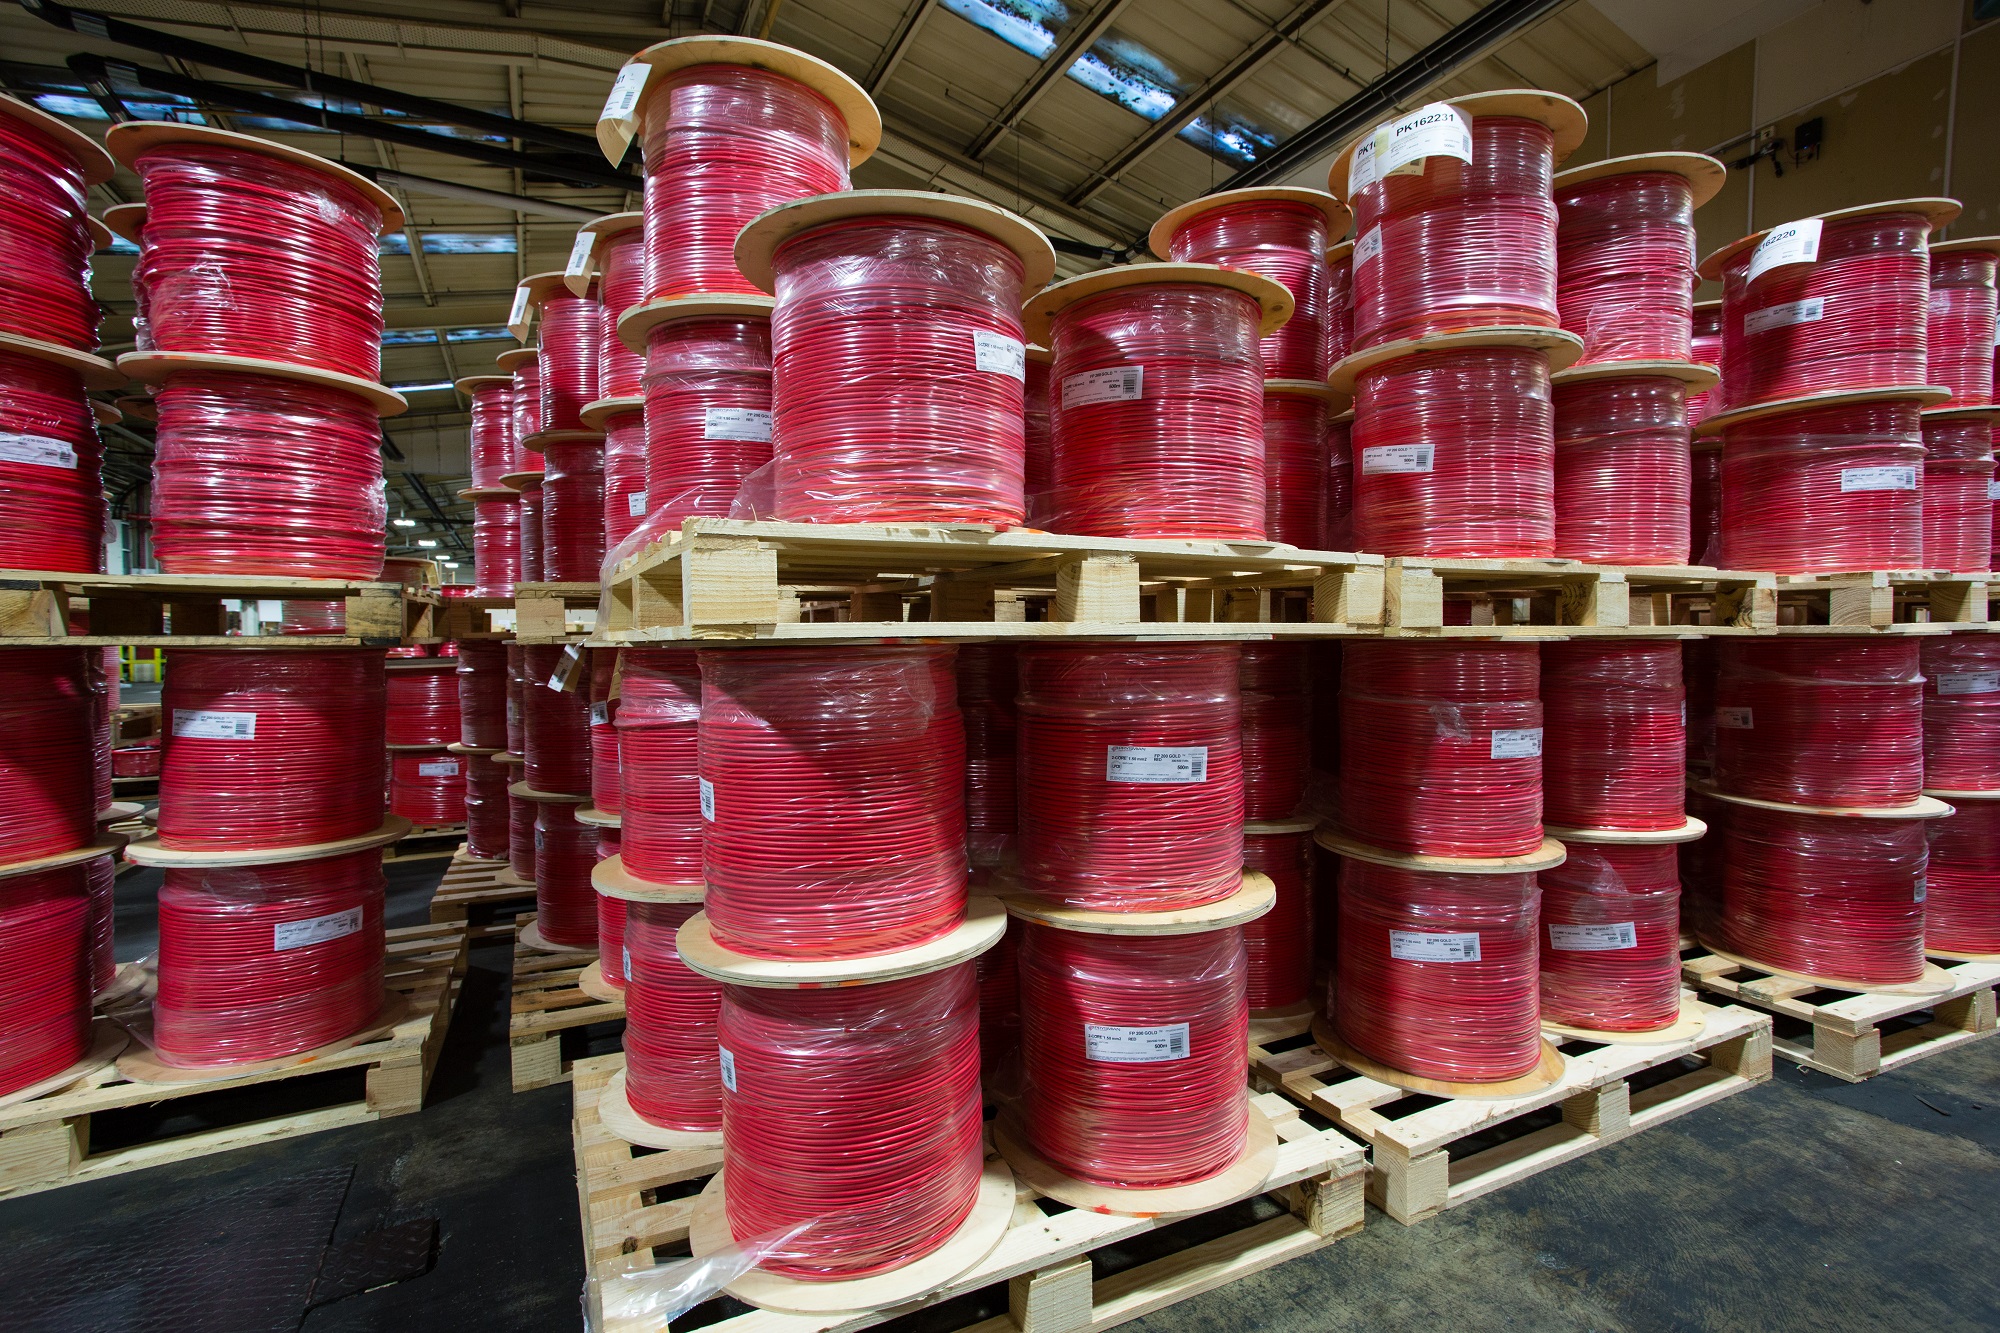 Red FP drums stored in a warehouse